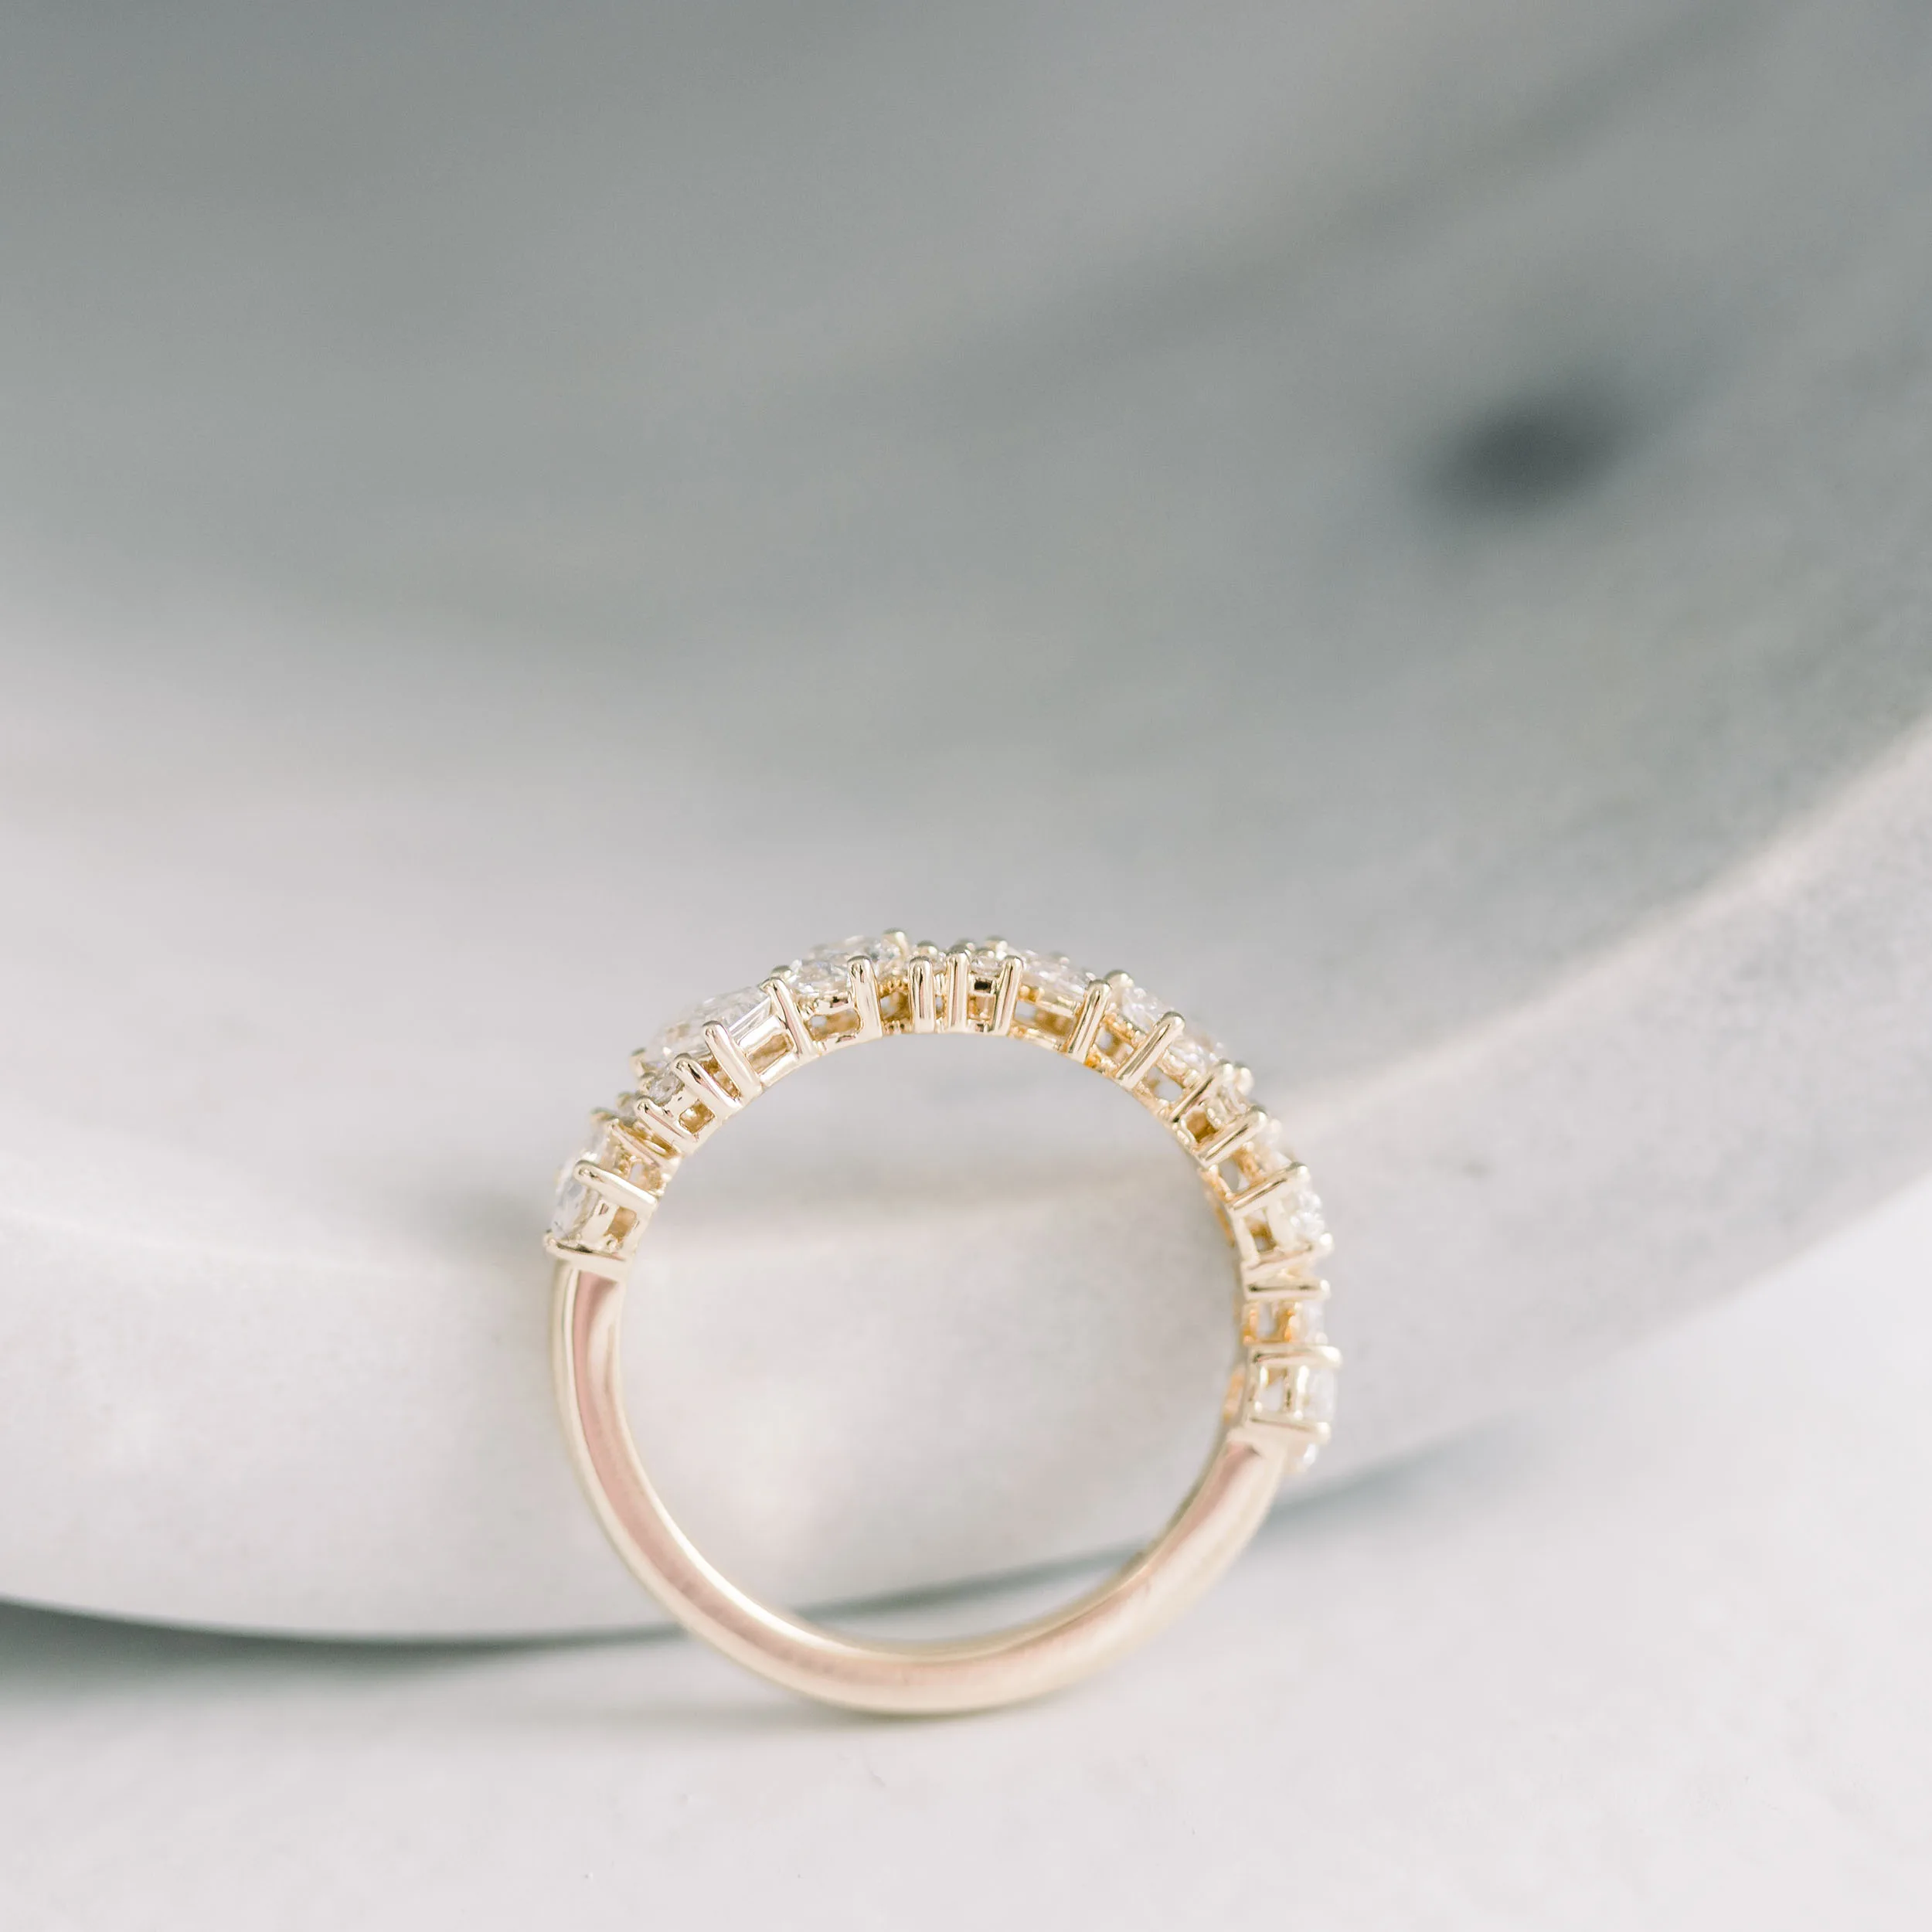 High Quality 1.25 ct Man Made Diamonds set in 14k Yellow Gold Cassie Half Band in 14k Yellow Gold 1.25ctw (Profile View)